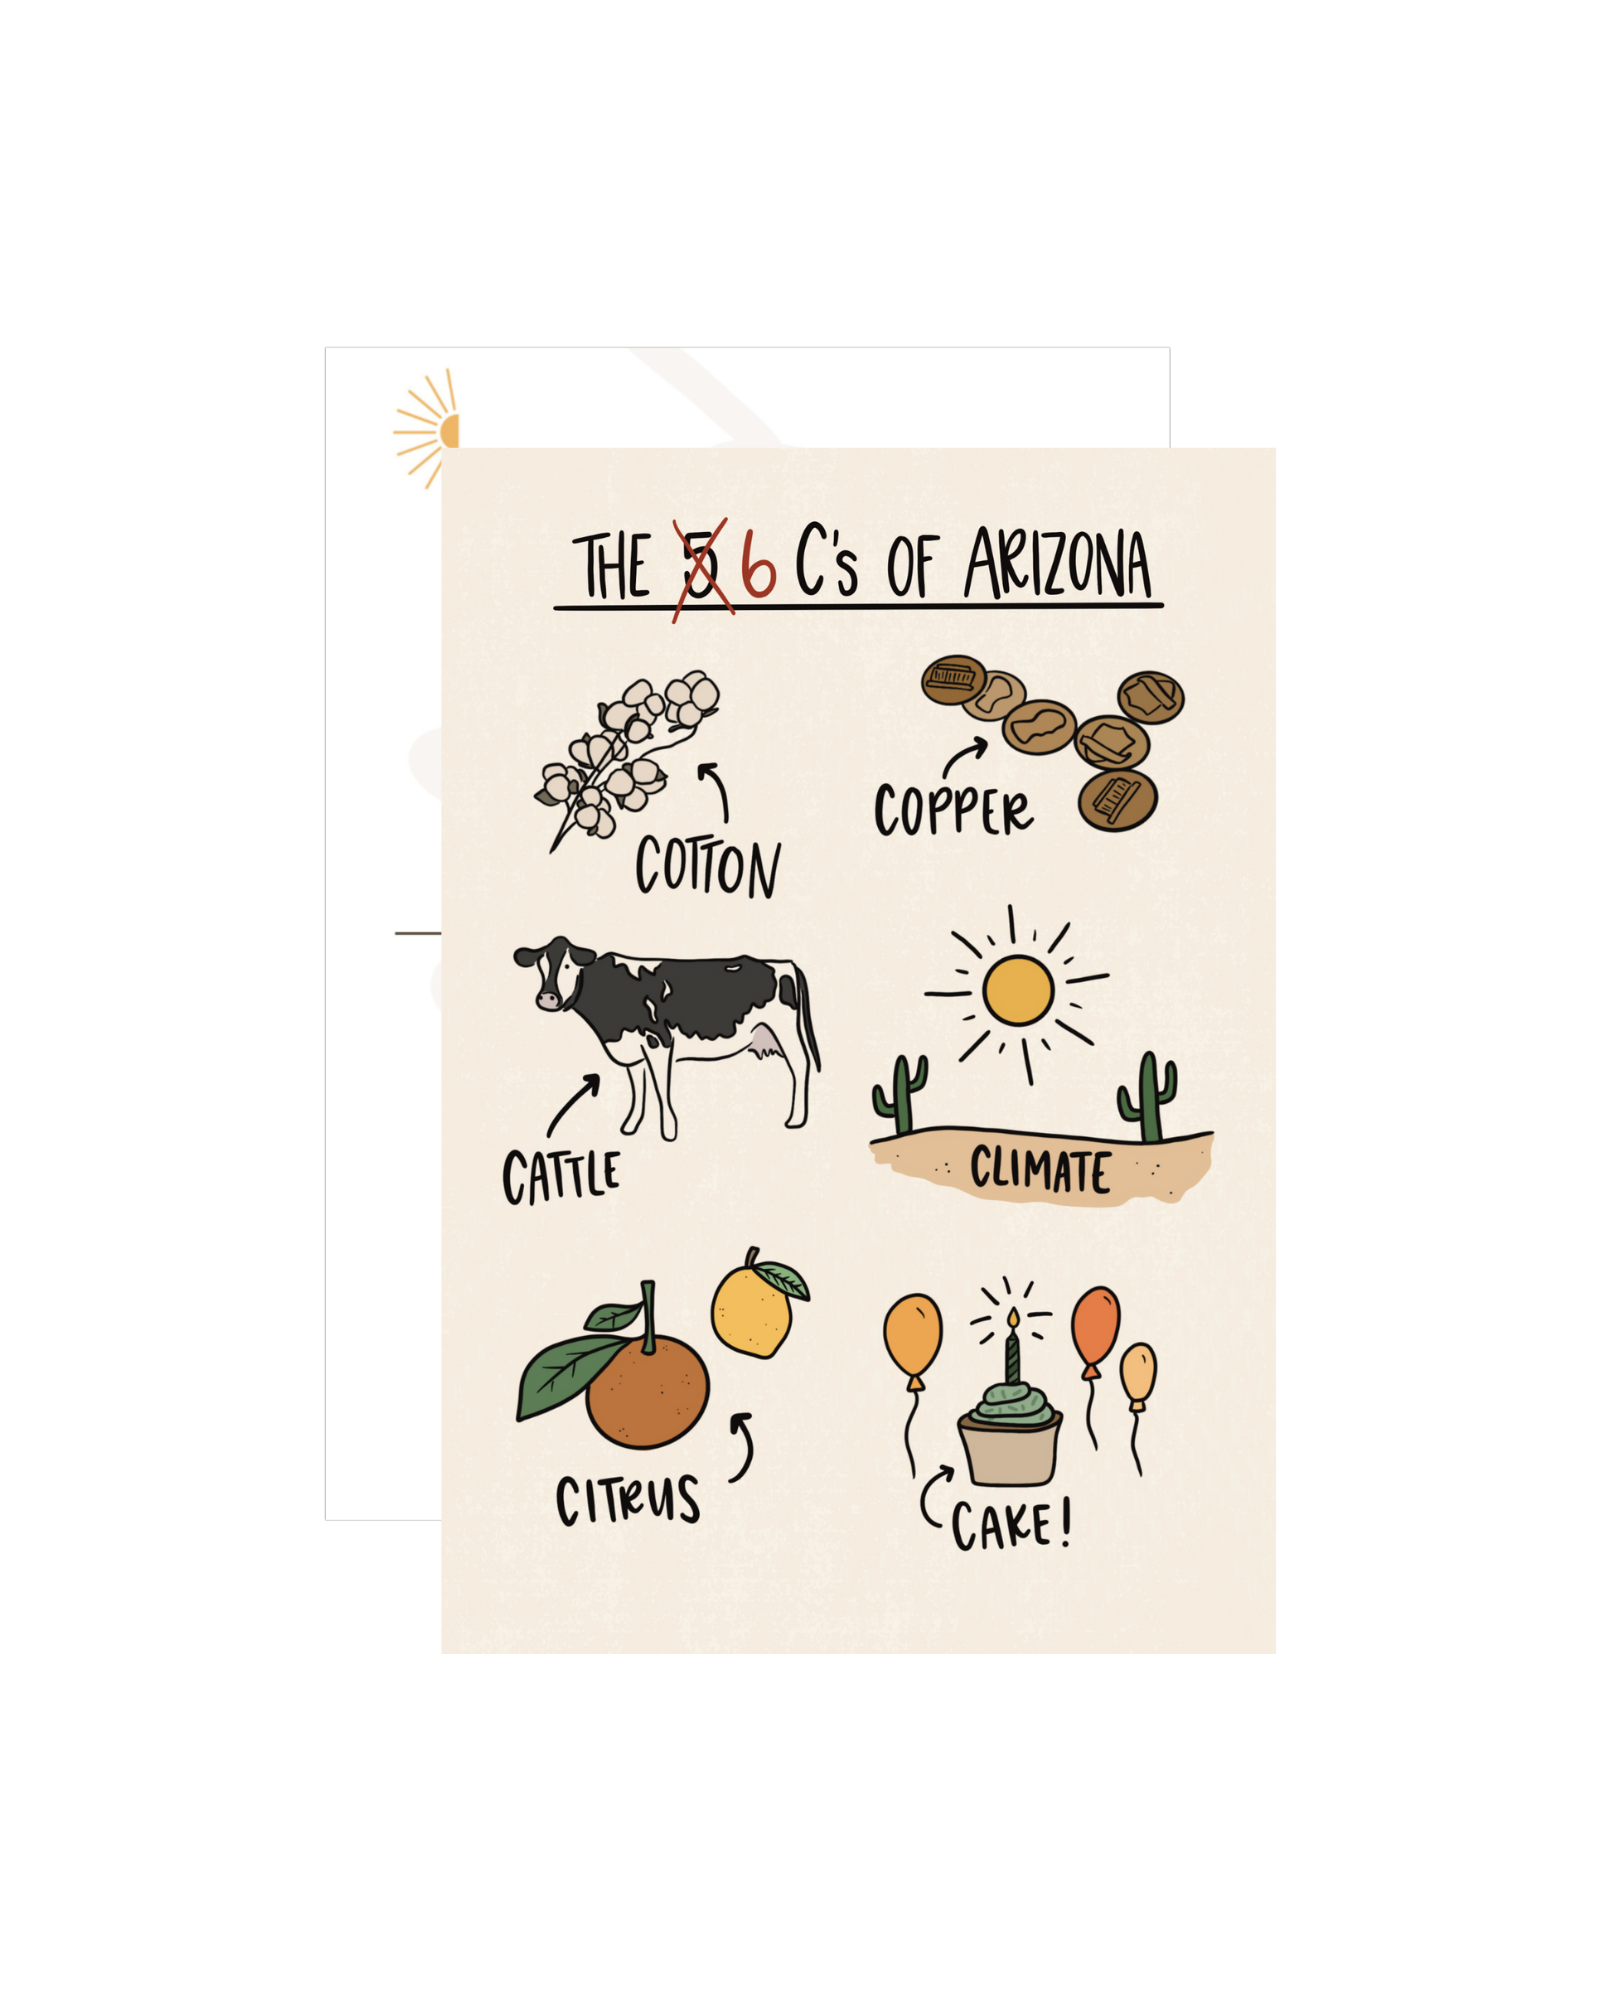 Tan postcard with illustrations of cotton, copper, cattle, climate, citrus, and cake and the words "the 6 cs of Arizona" in black lettering